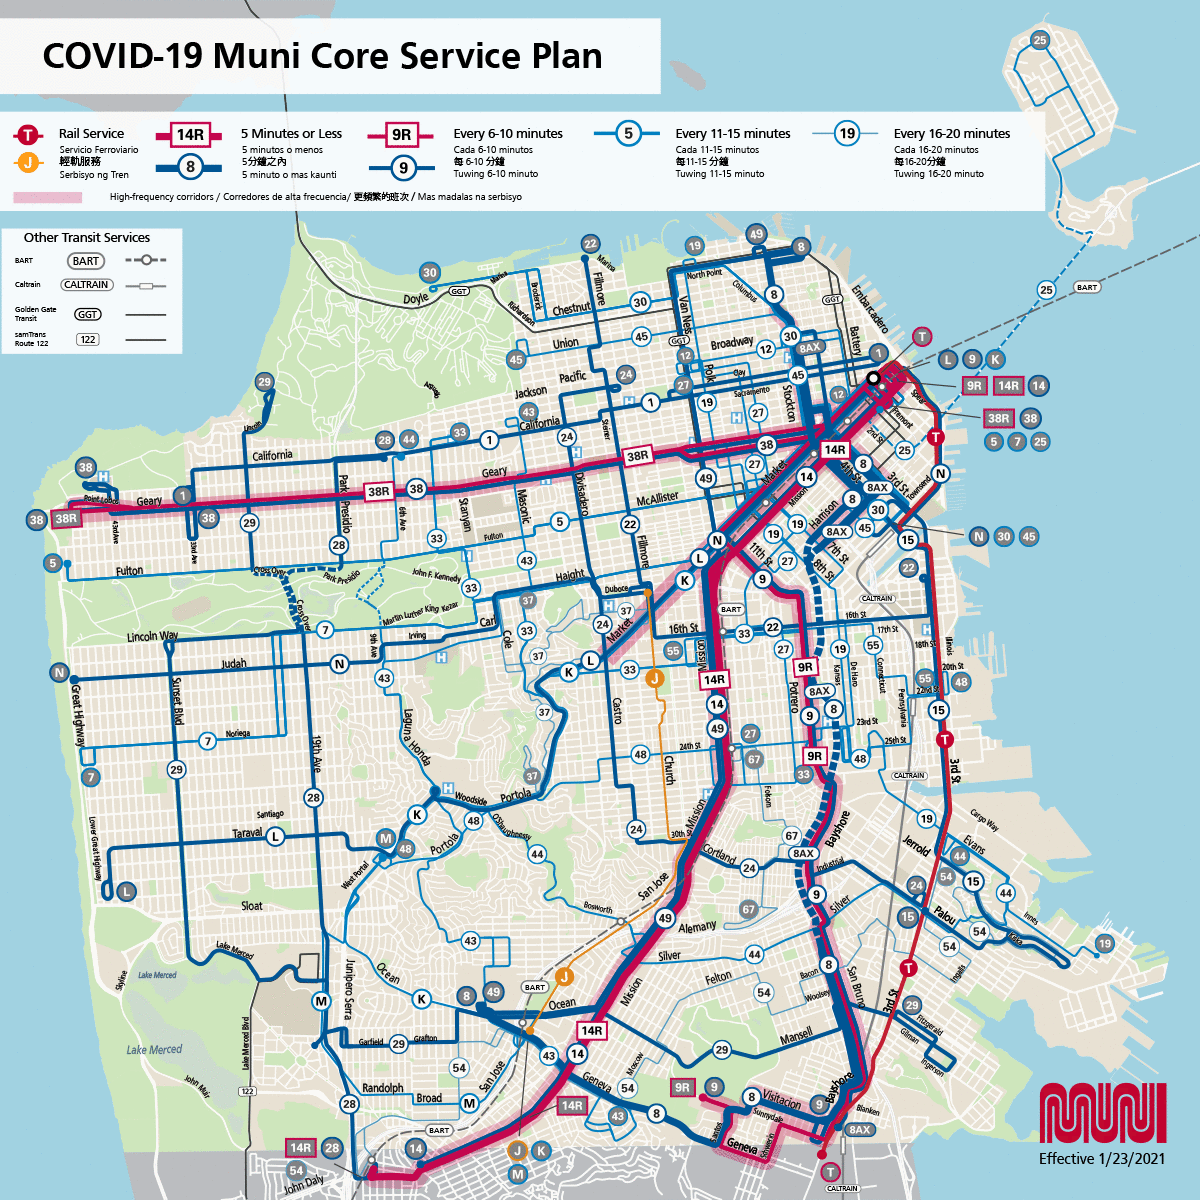 Core service poster showing current routes in service